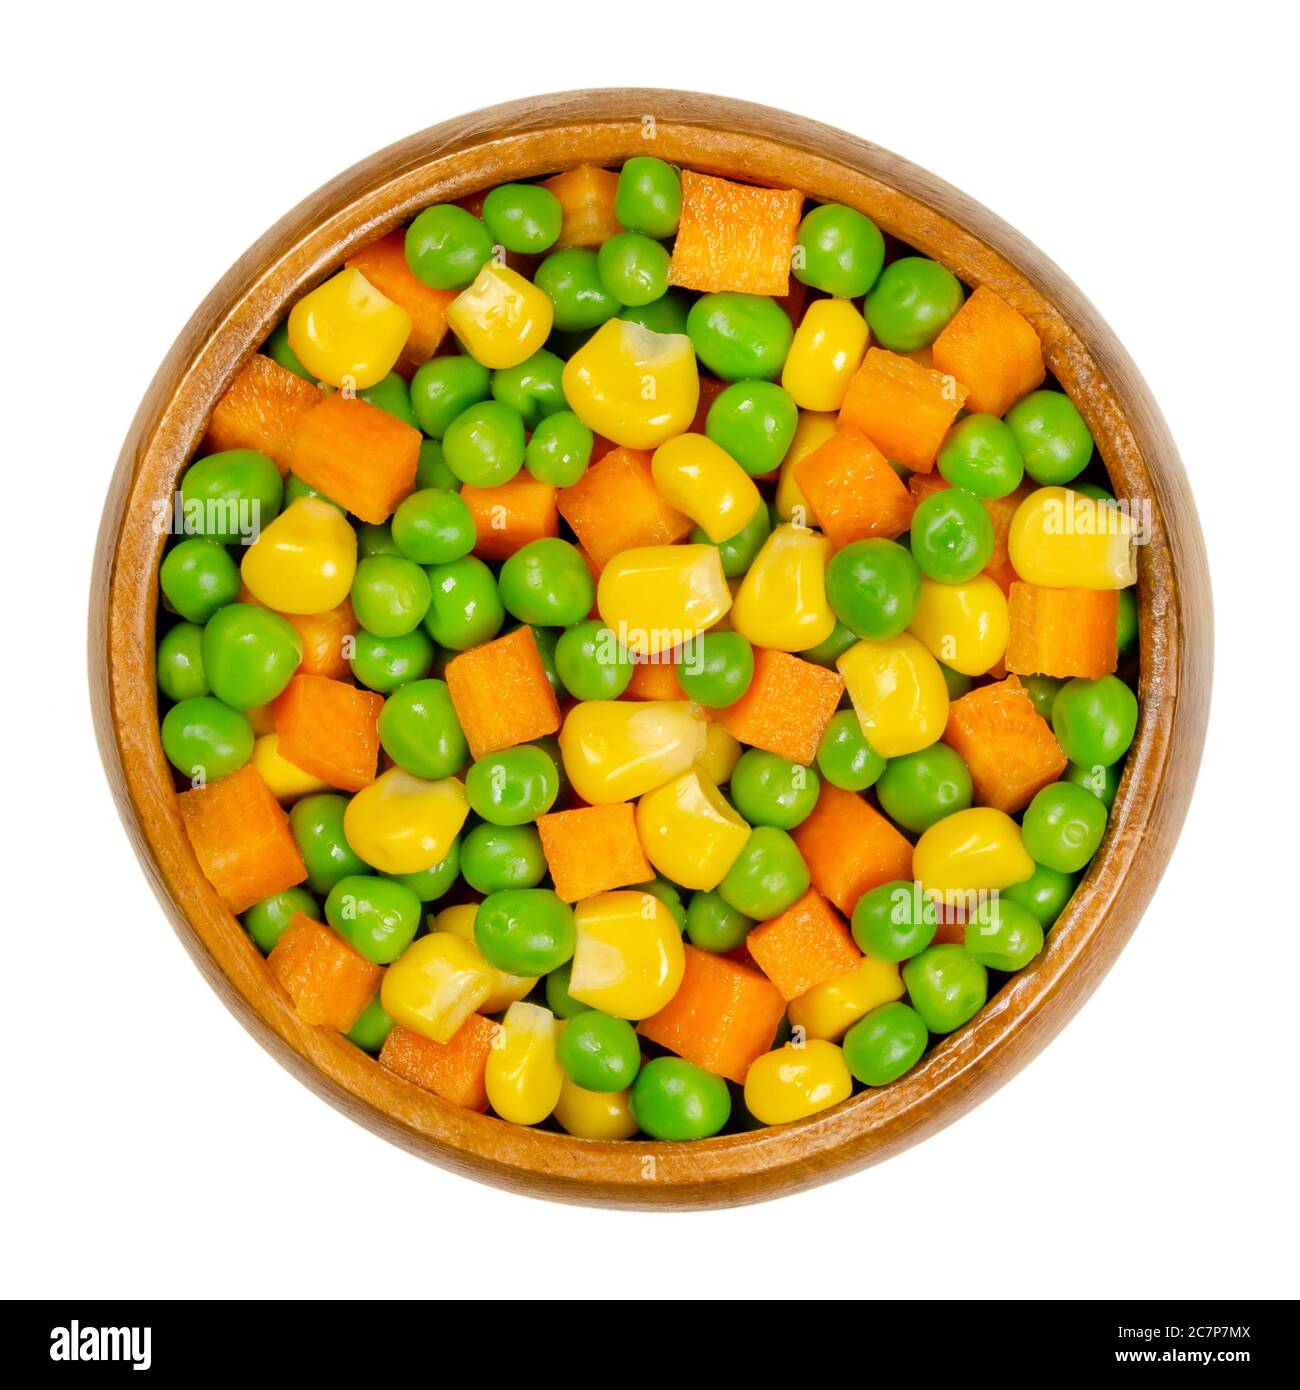 Green peas, corn and carrot cubes in wooden bowl. Mixed vegetables. Peas mixed with vegetable maize with carrot cubes. Stock Photo